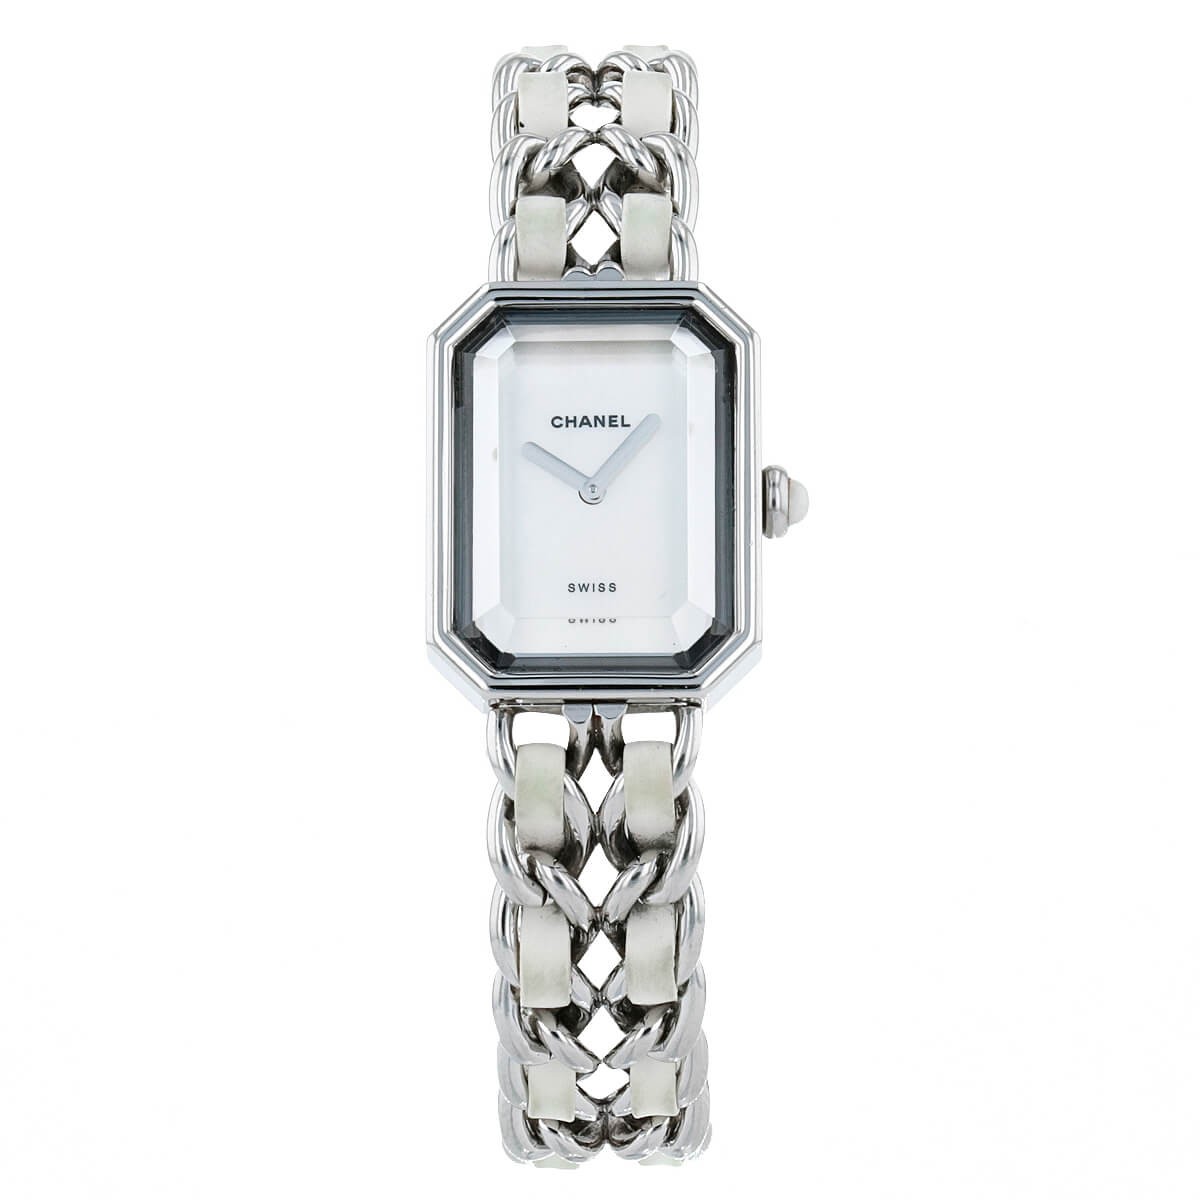 Chanel  The Première Watch  Trends and style  WorldTempus